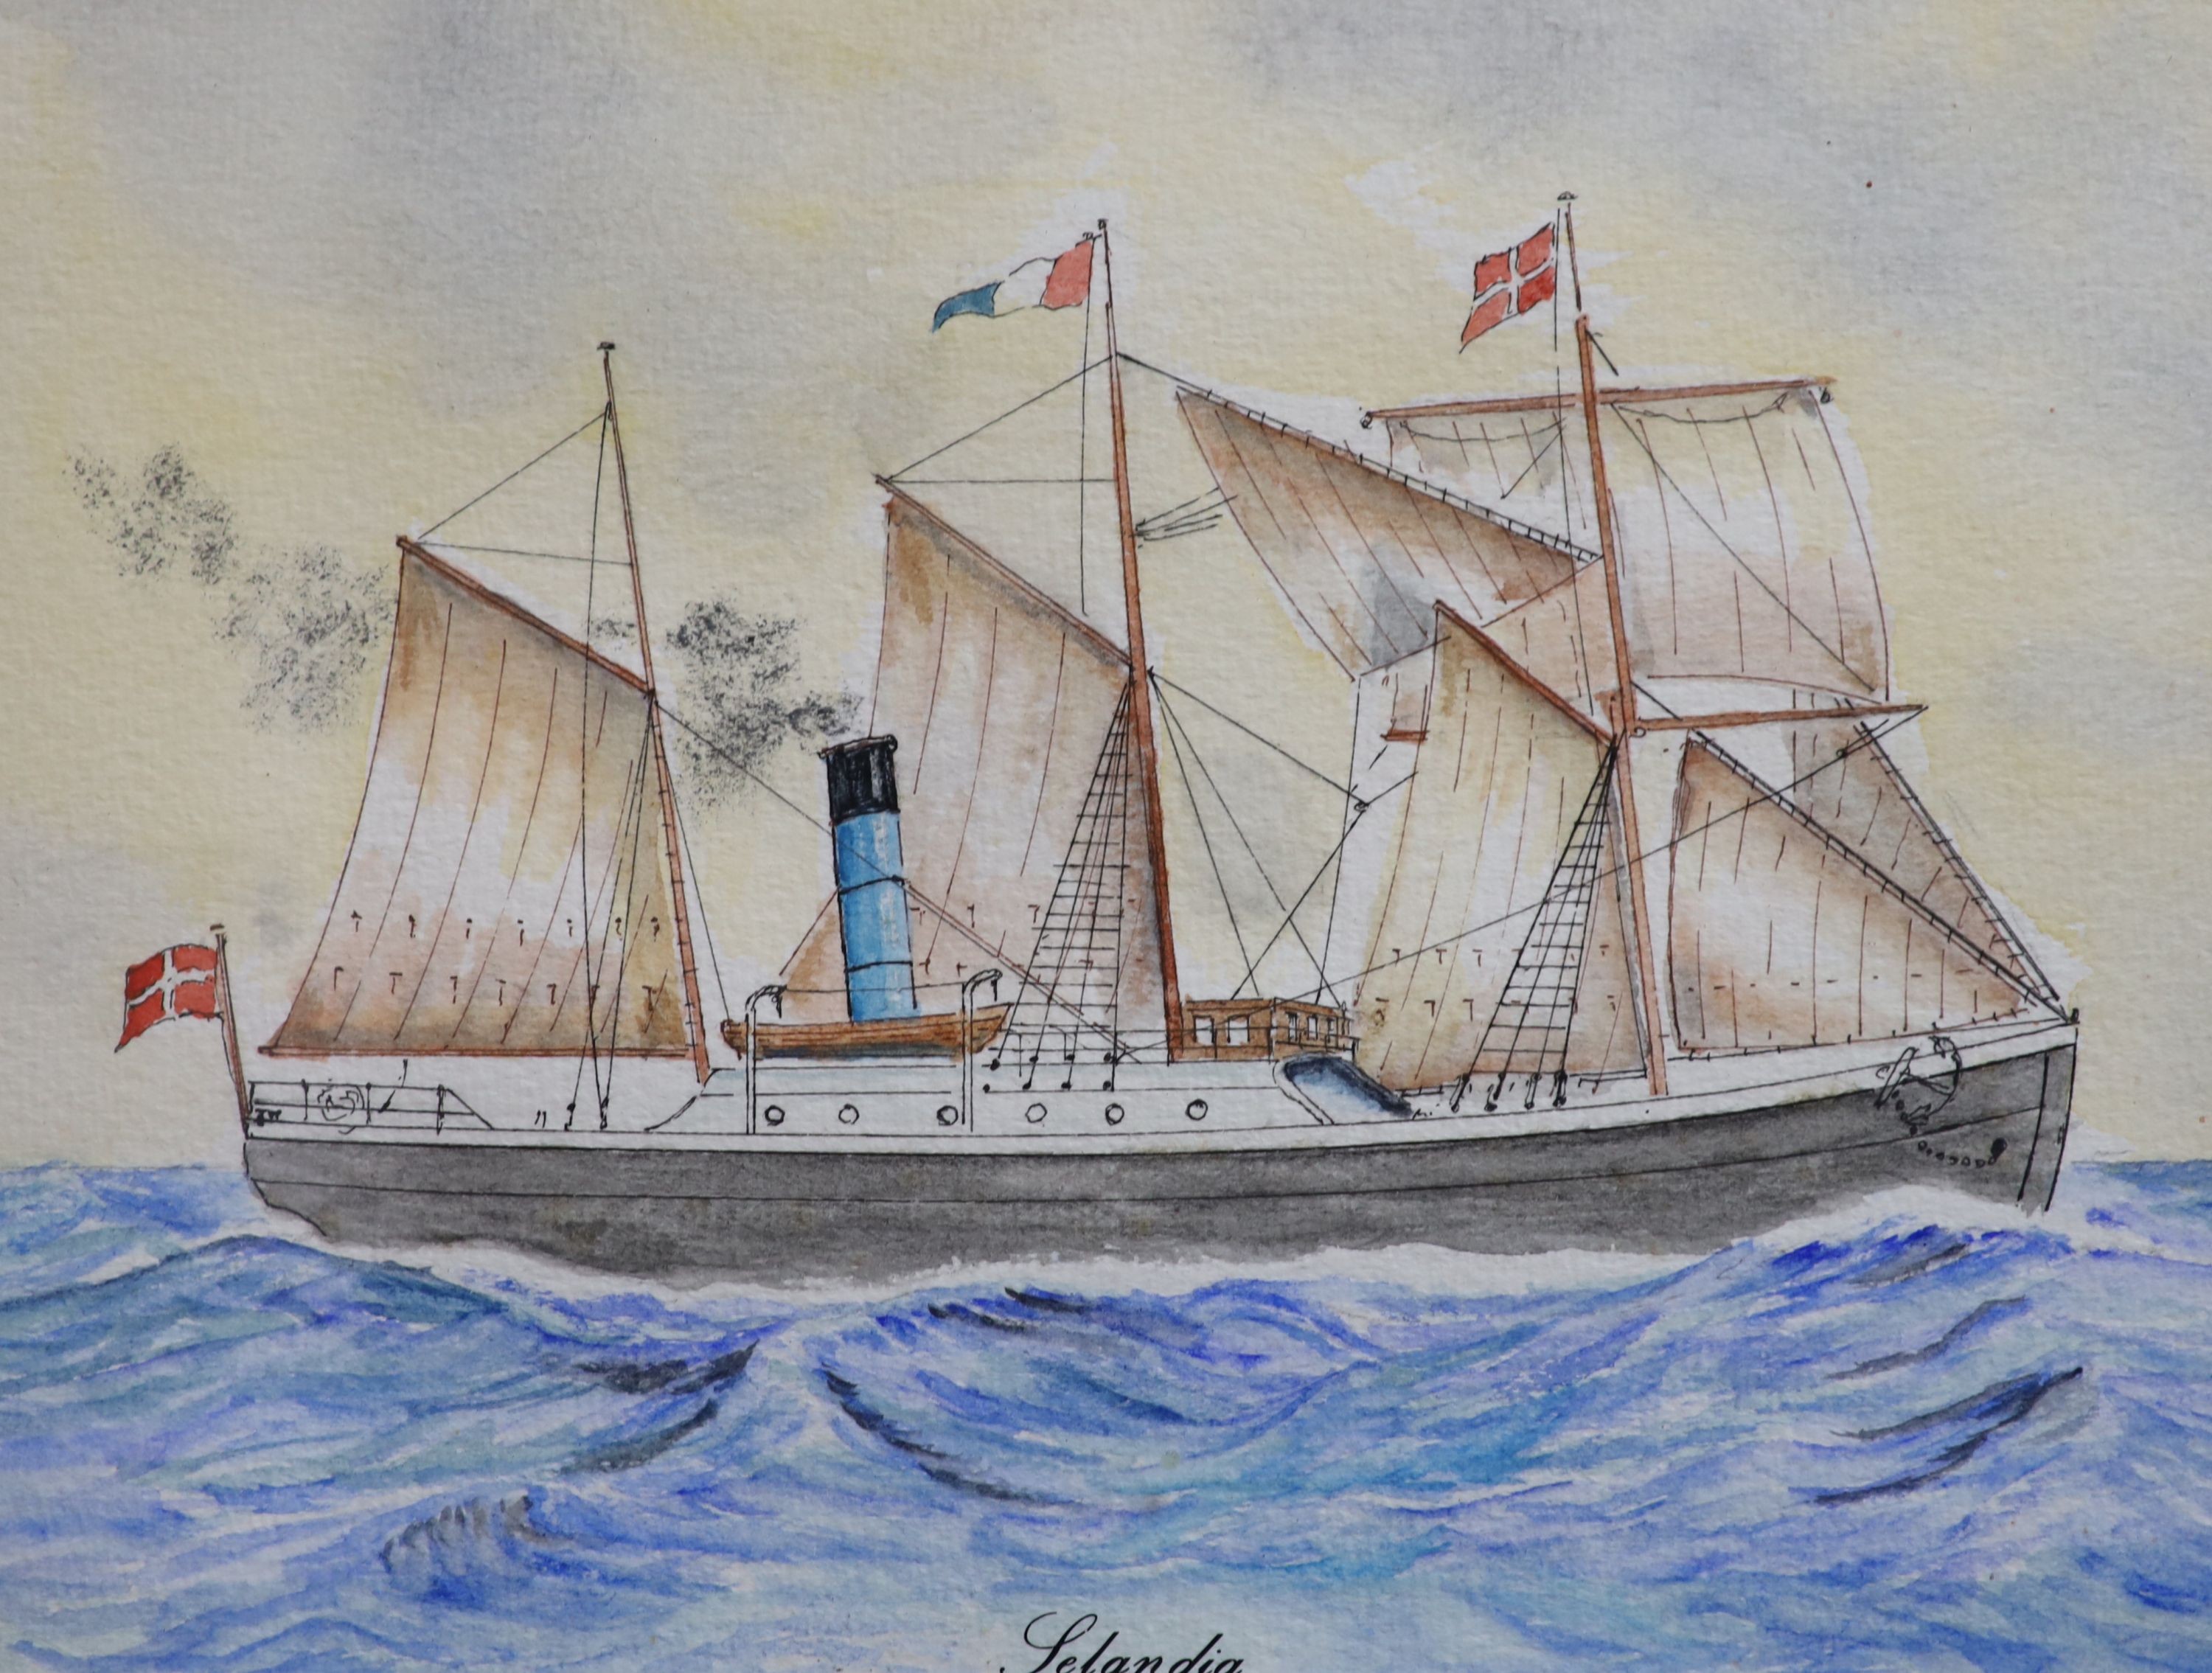 H. Crane, watercolour and gouache, The Danish Steamship, Sigrid, 18 x 35cm, together with five other marine related pictures